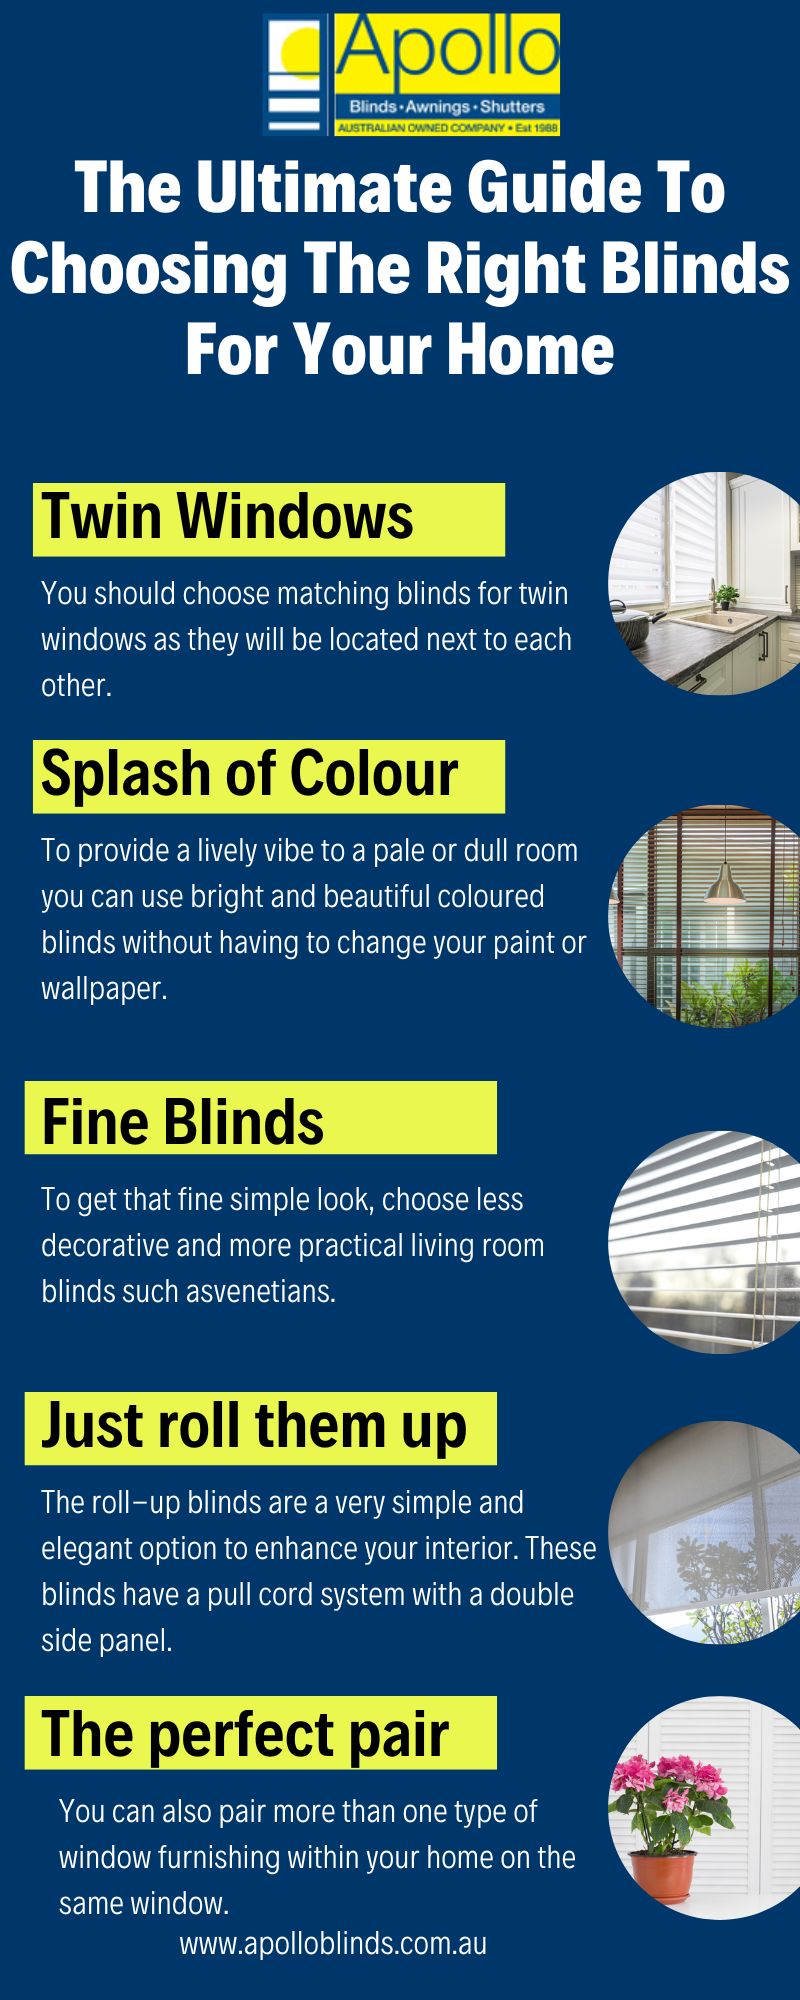 The Ultimate Guide To Choosing The Right Blinds For Your Home